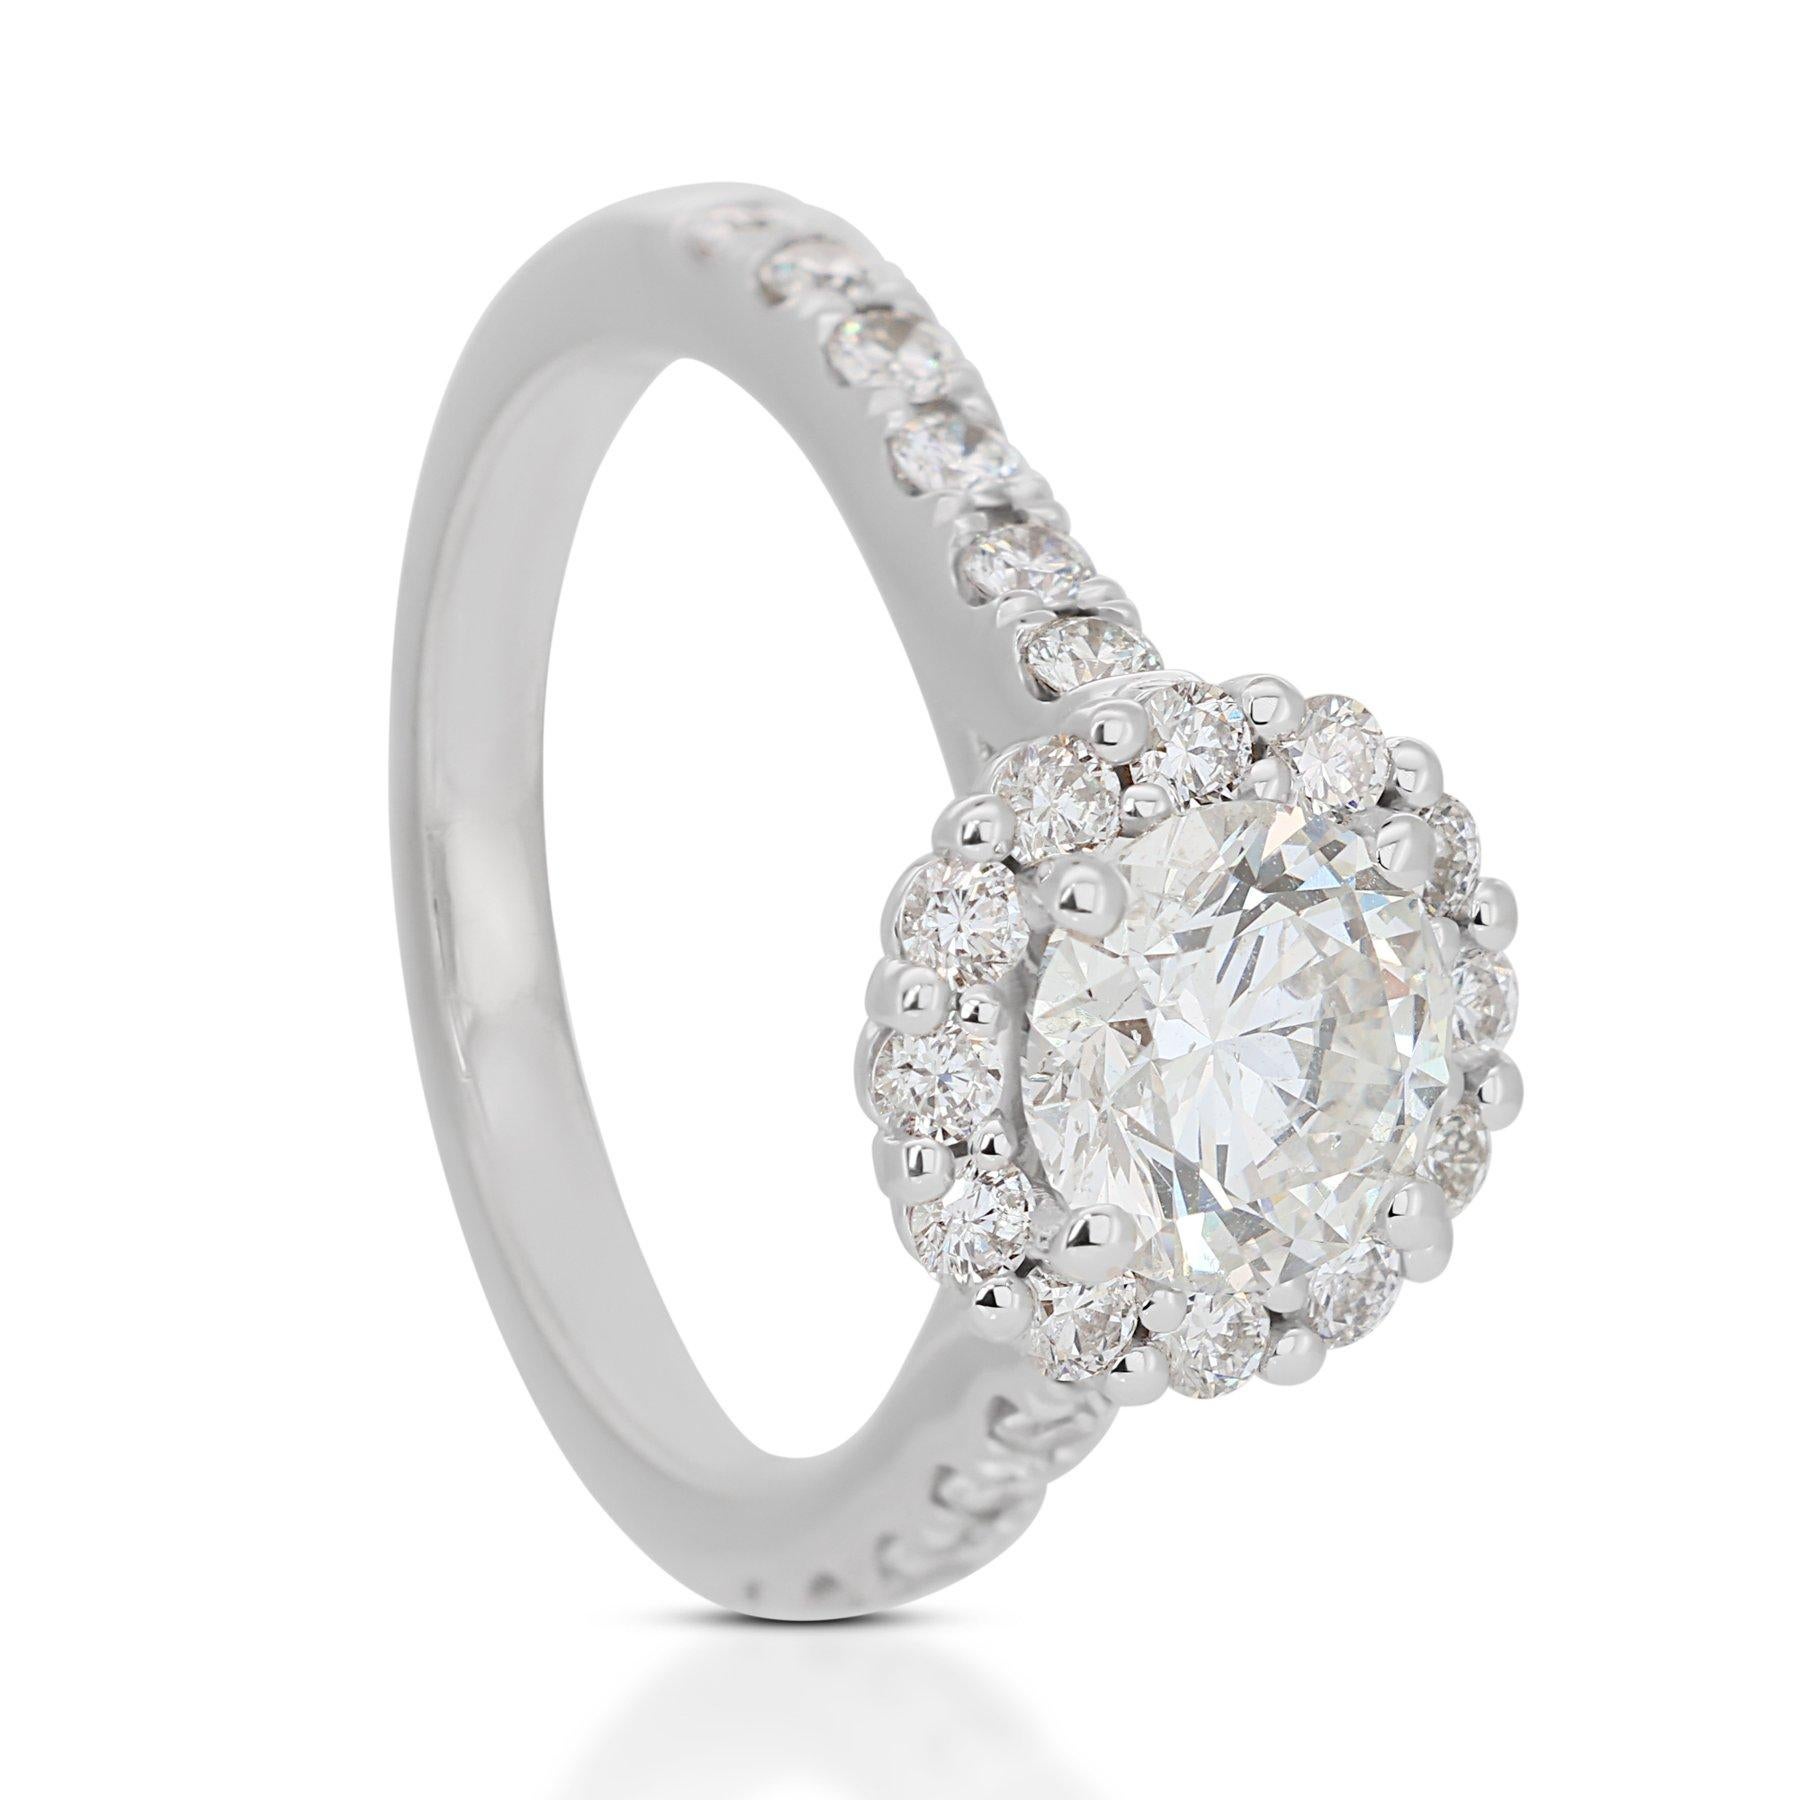 Luxurious 1.72ct Diamond Halo Ring in 18k White Gold - GIA Certified

Introducing a masterpiece of modern elegance, this exquisite halo ring crafted from 18k white gold features a central 1.21-carat round diamond, radiating pristine clarity and